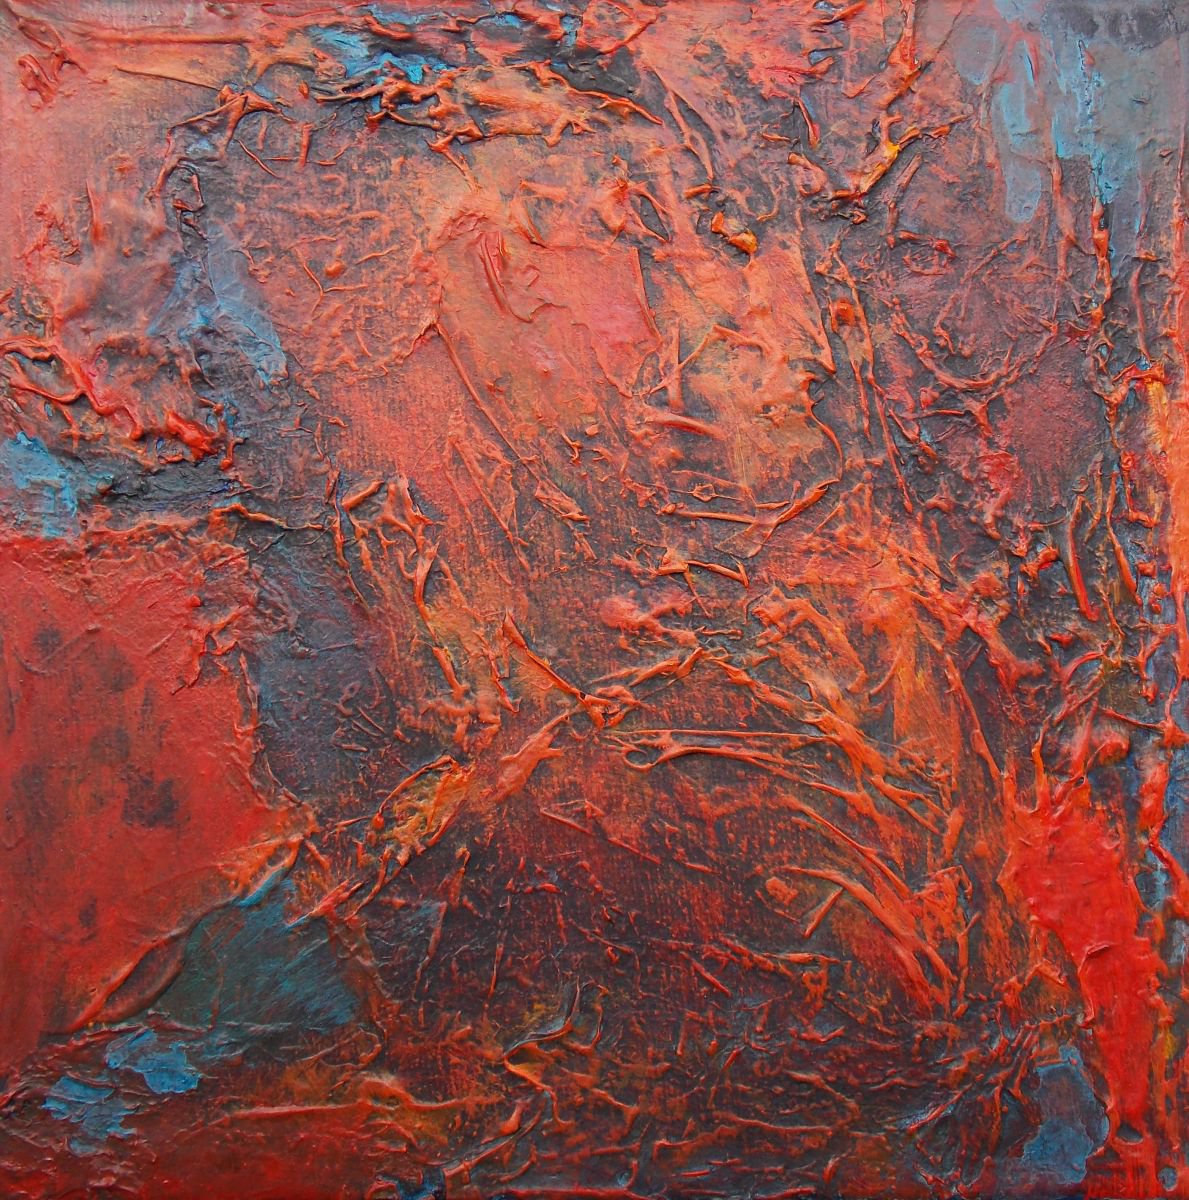 Red Point - Abstract Original Small Painting in Acrylic on Square Canvas, Rich of Textures... by Adriana Vasile